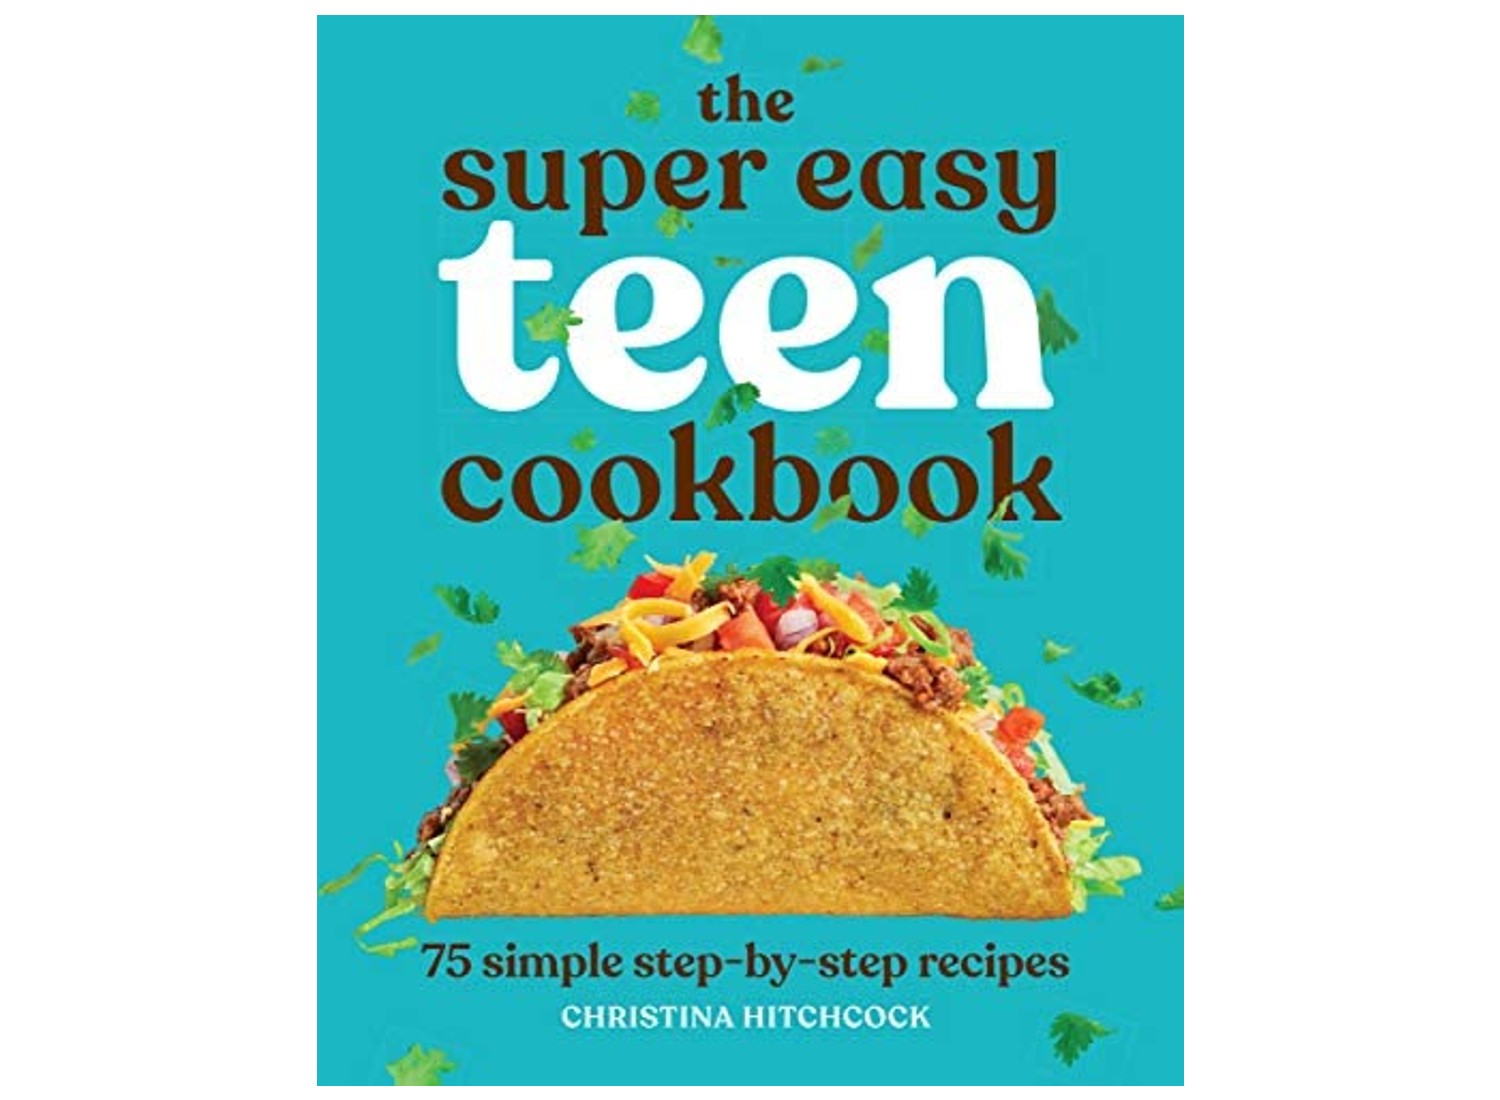 The Super Easy Teen Cookbook for Beginners